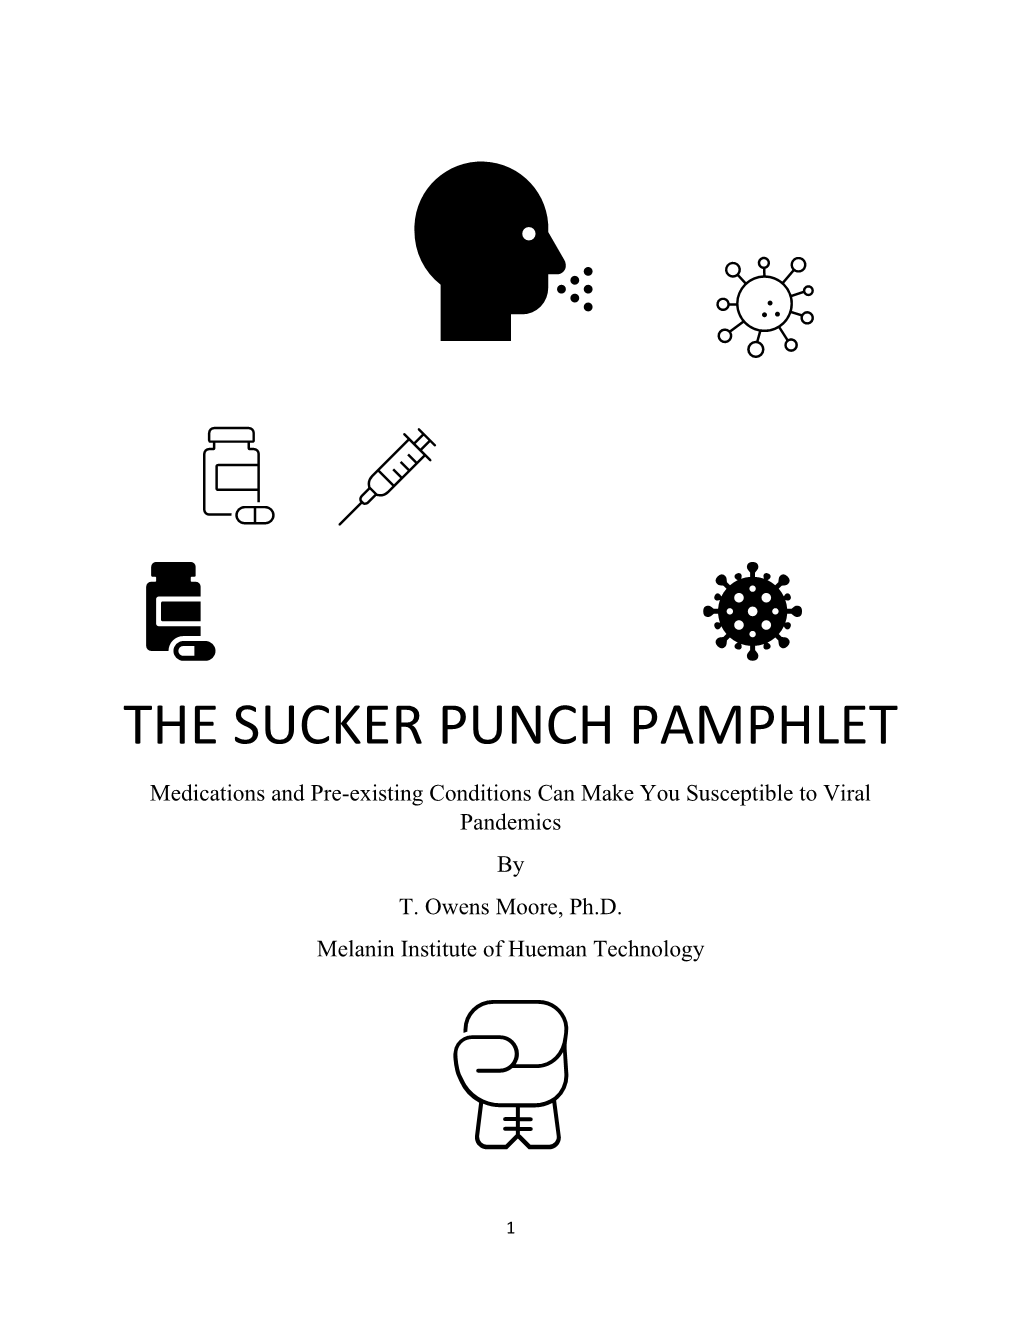 The Sucker Punch Pamphlet